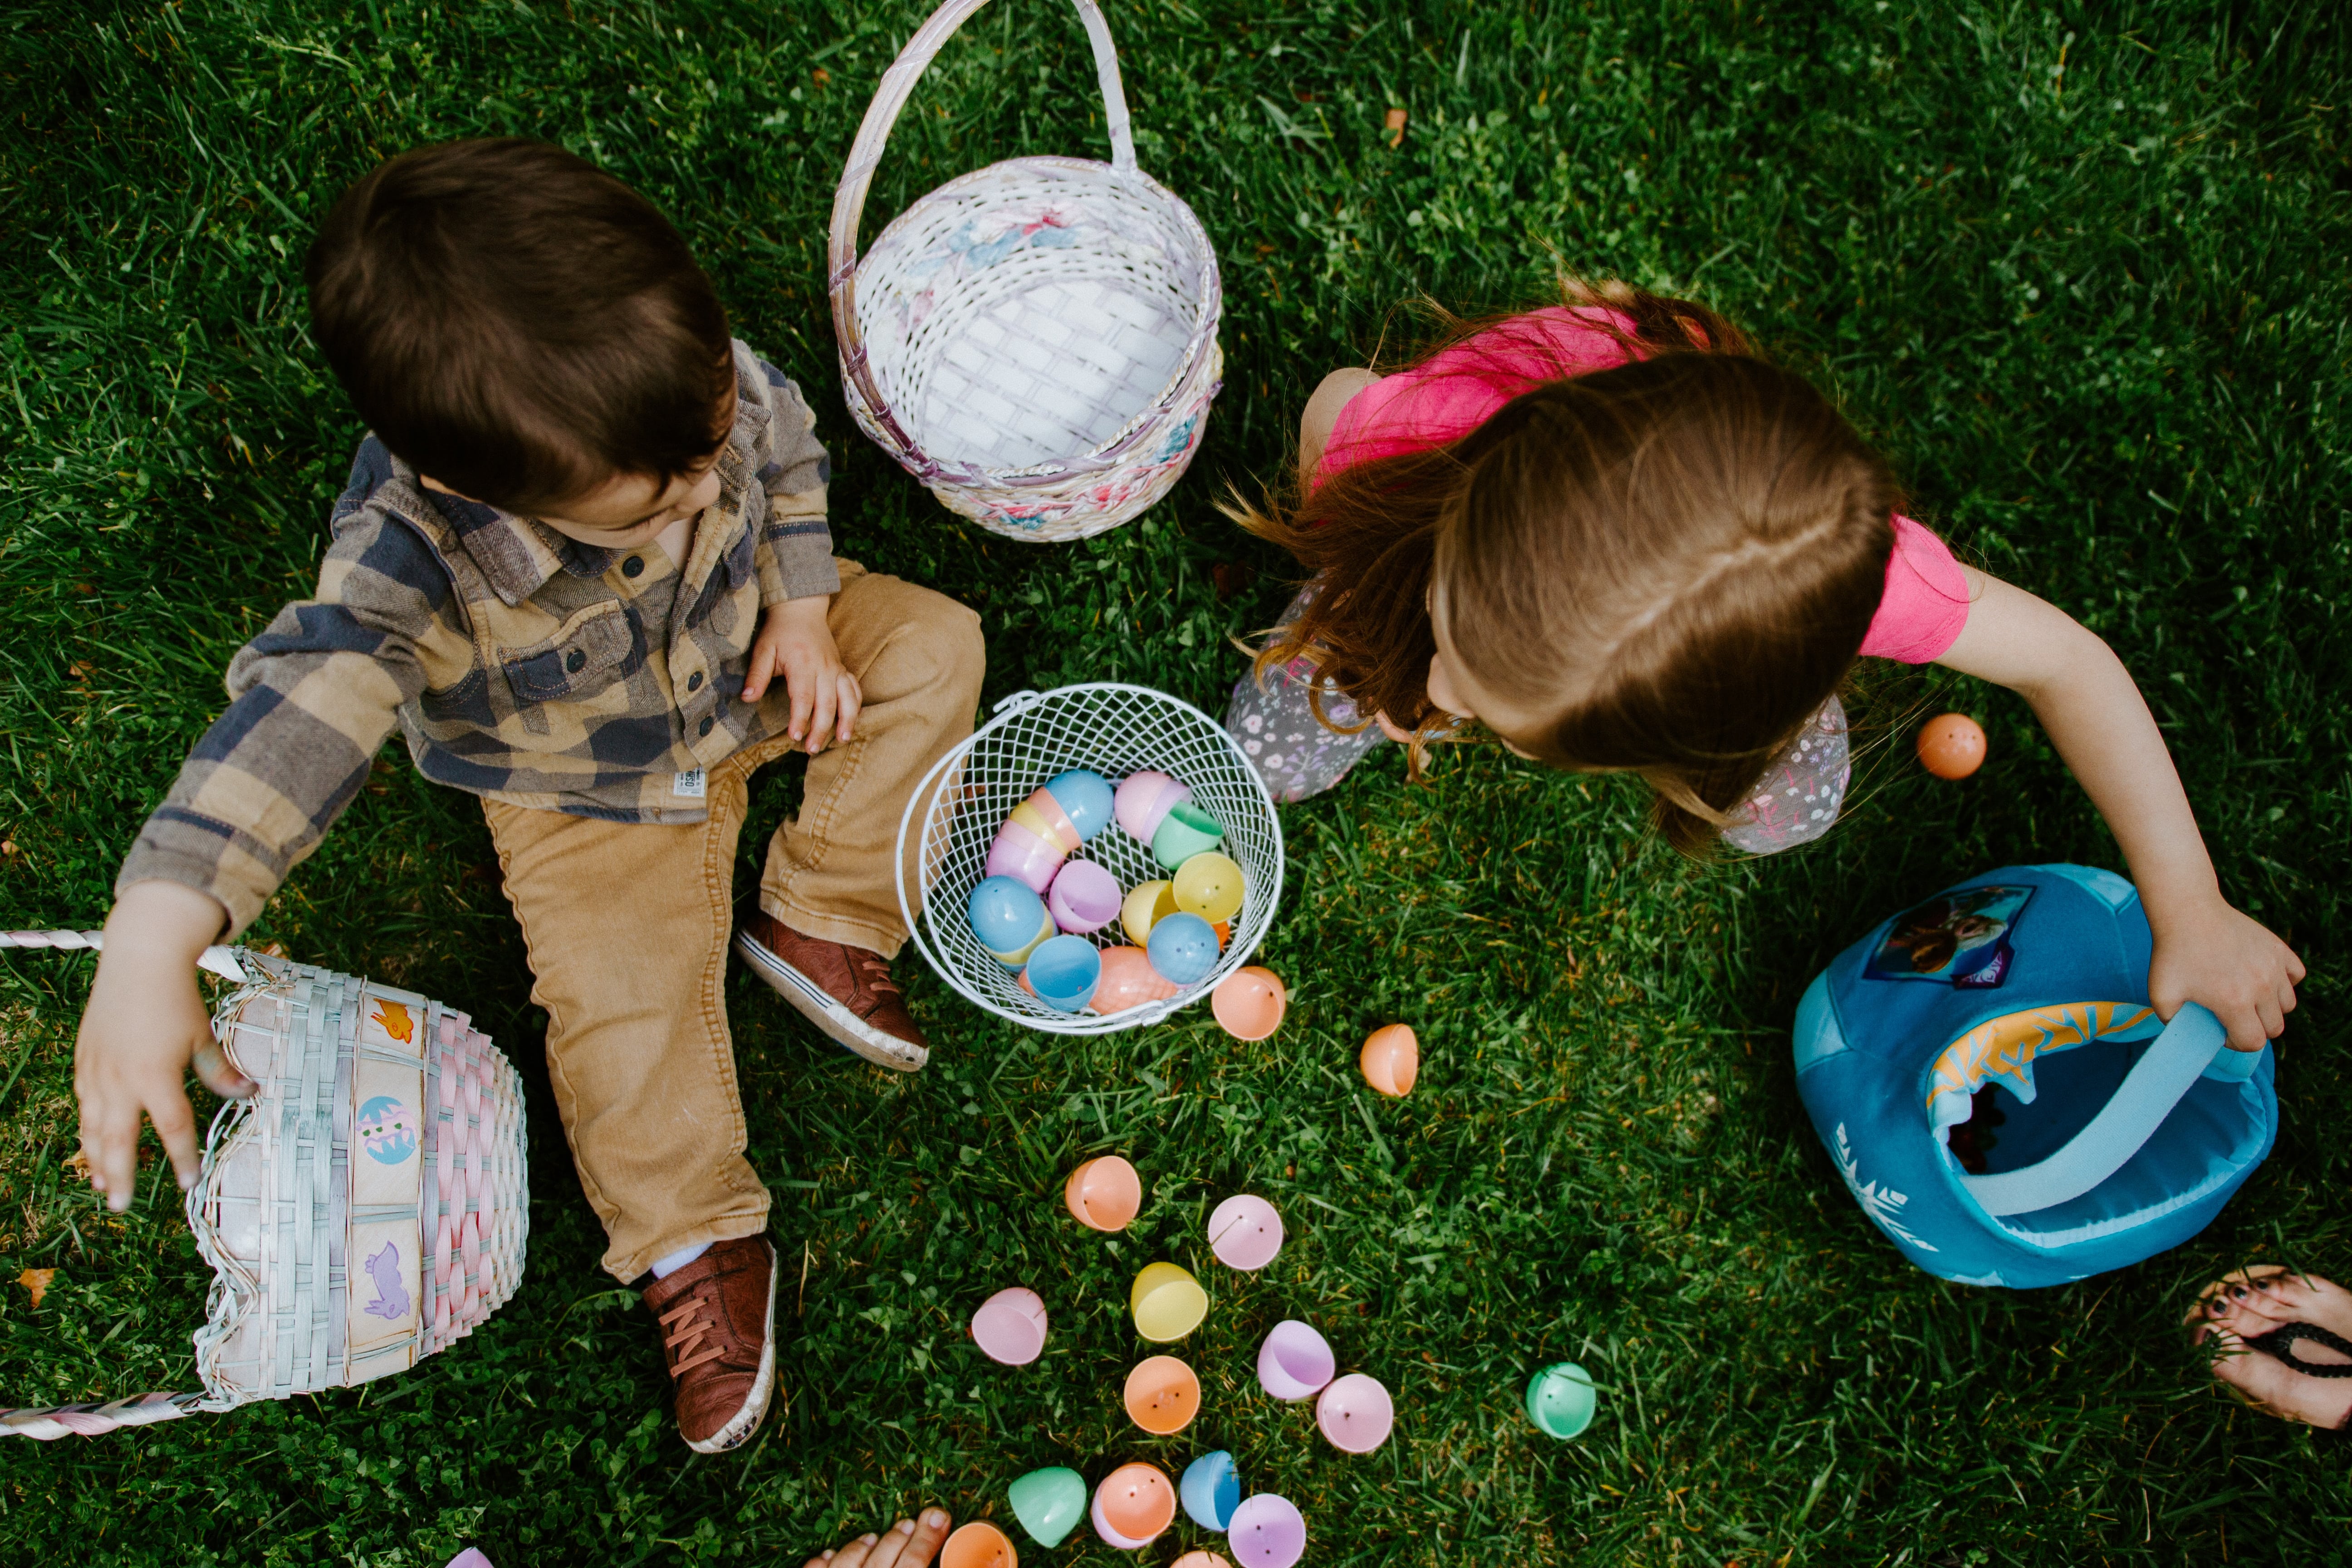 Two children explore their Easter baskets